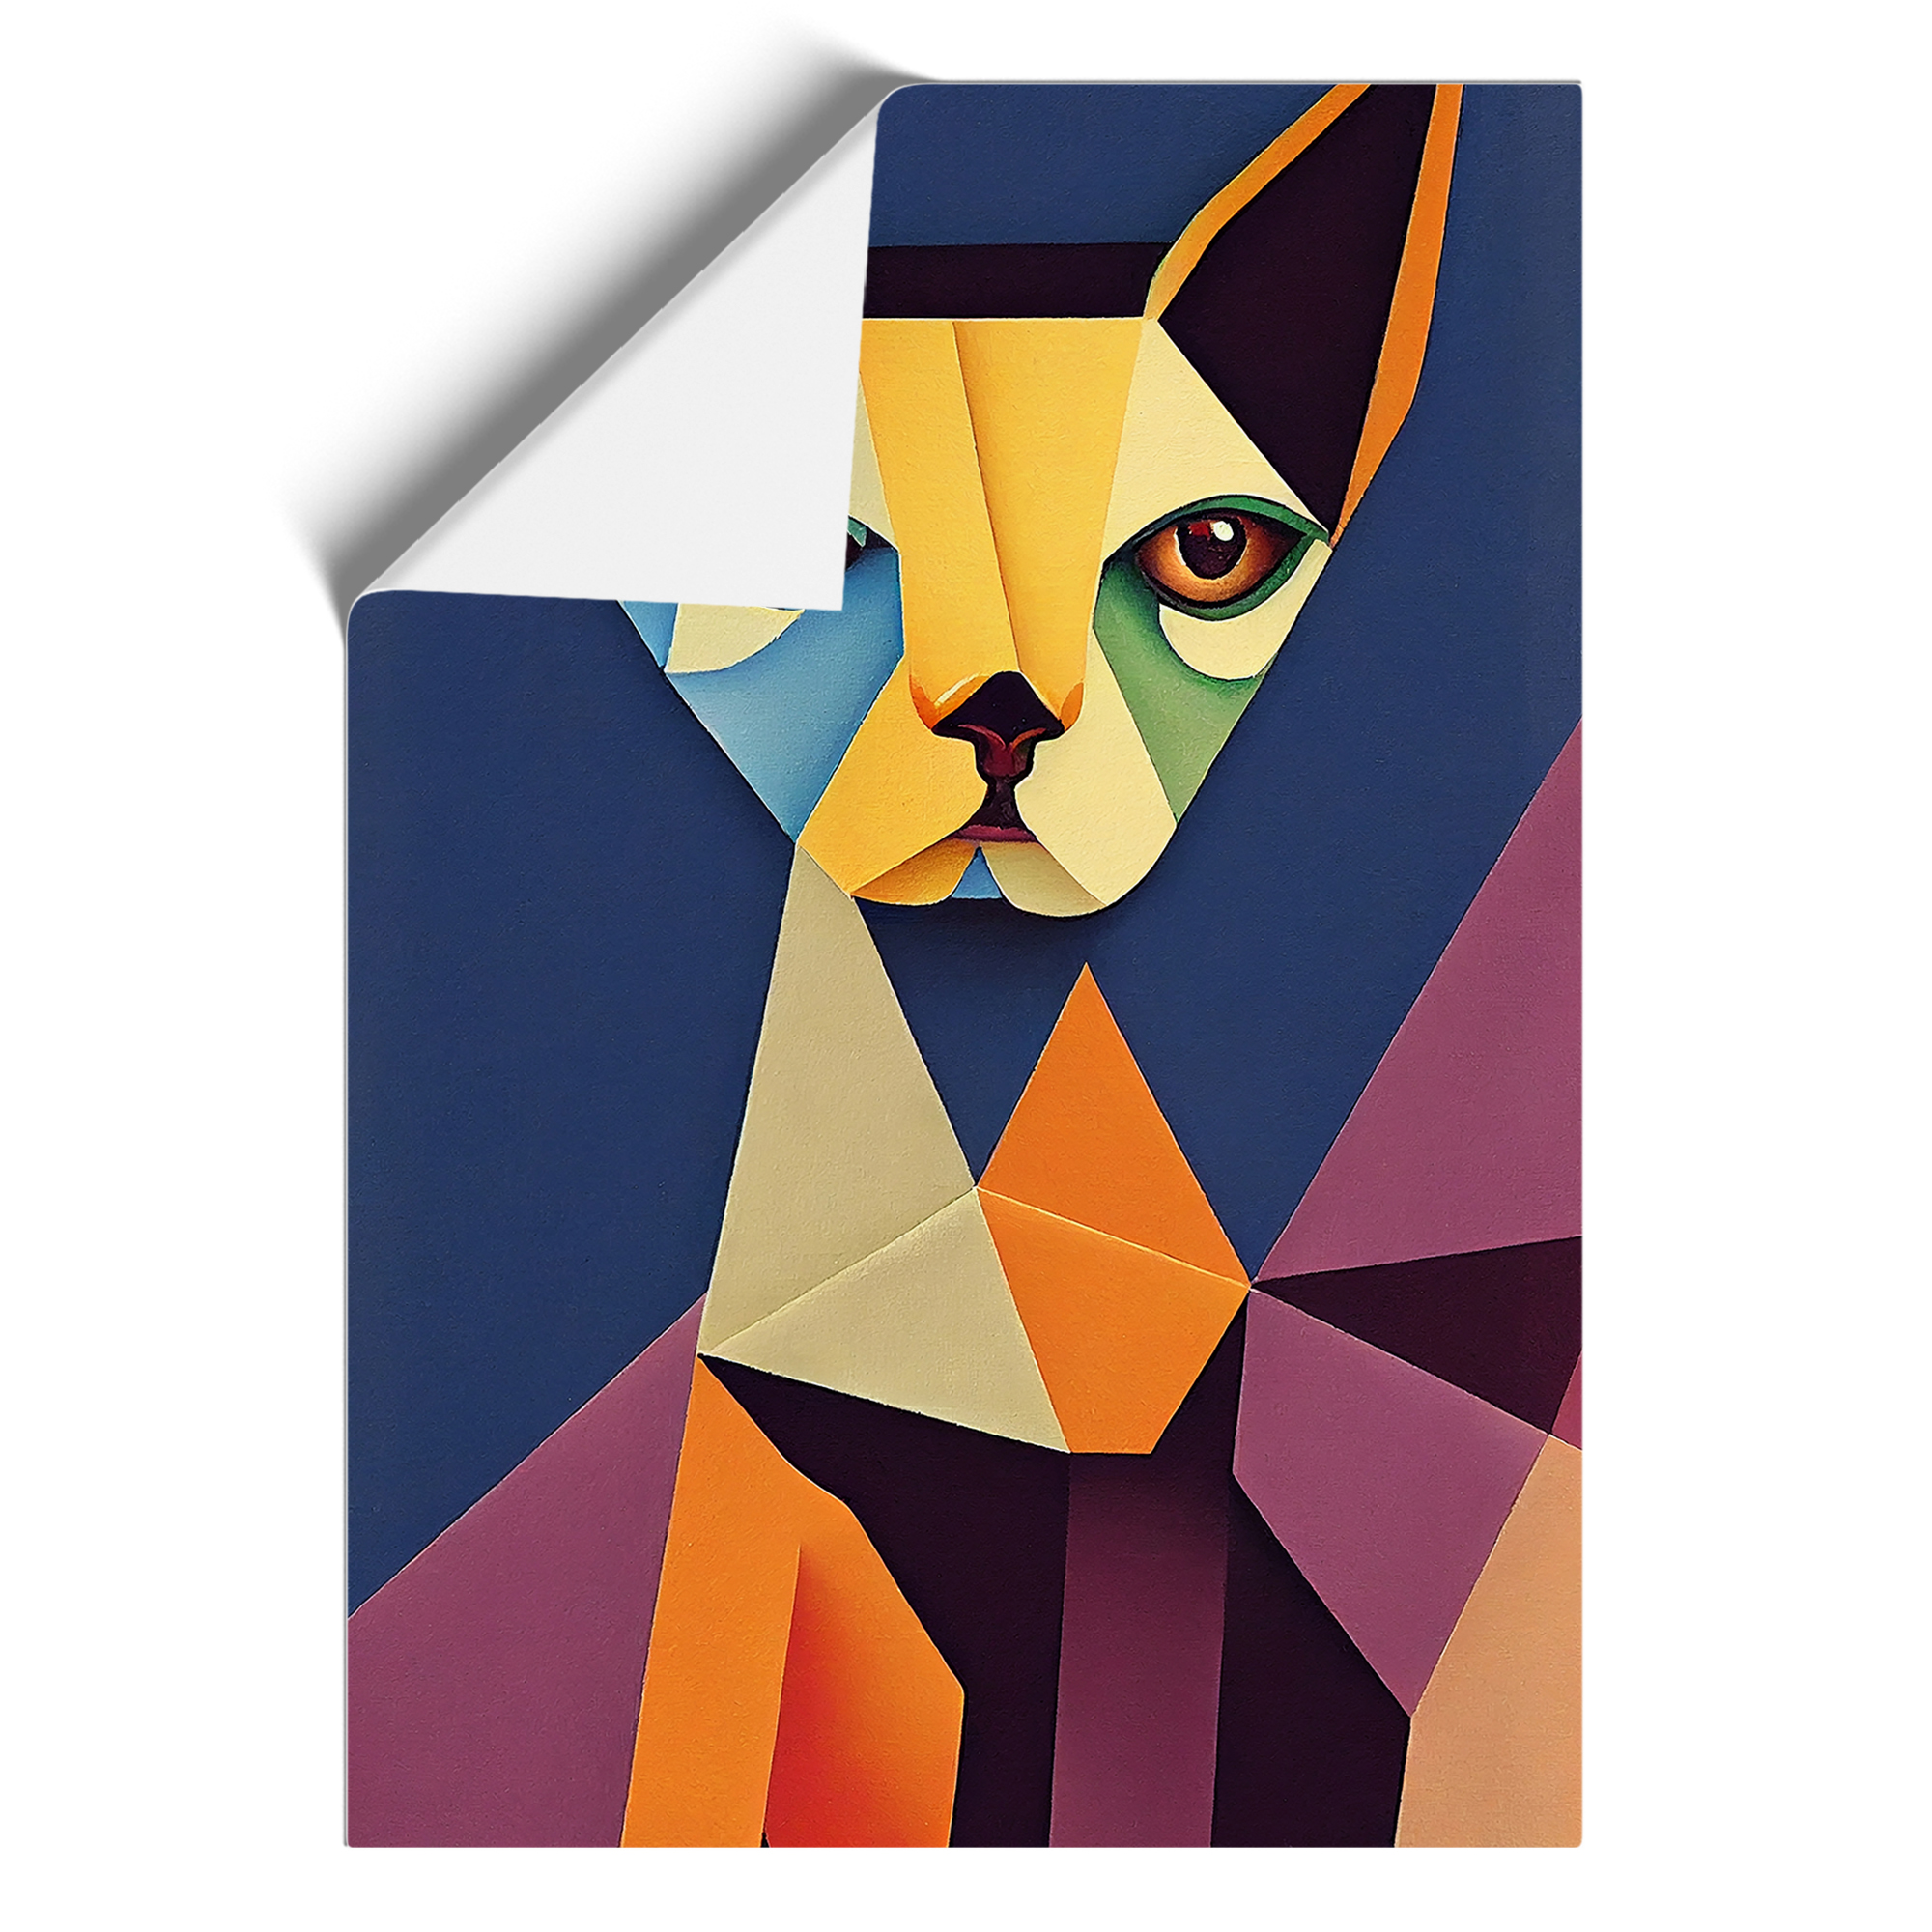 EzPosterPrints - Cat Posters - Cubism Colorful Cute Cats - Poster Printing  - Wall Art Print for Home Office Decor - Colorful Cat 16-16X16 inches